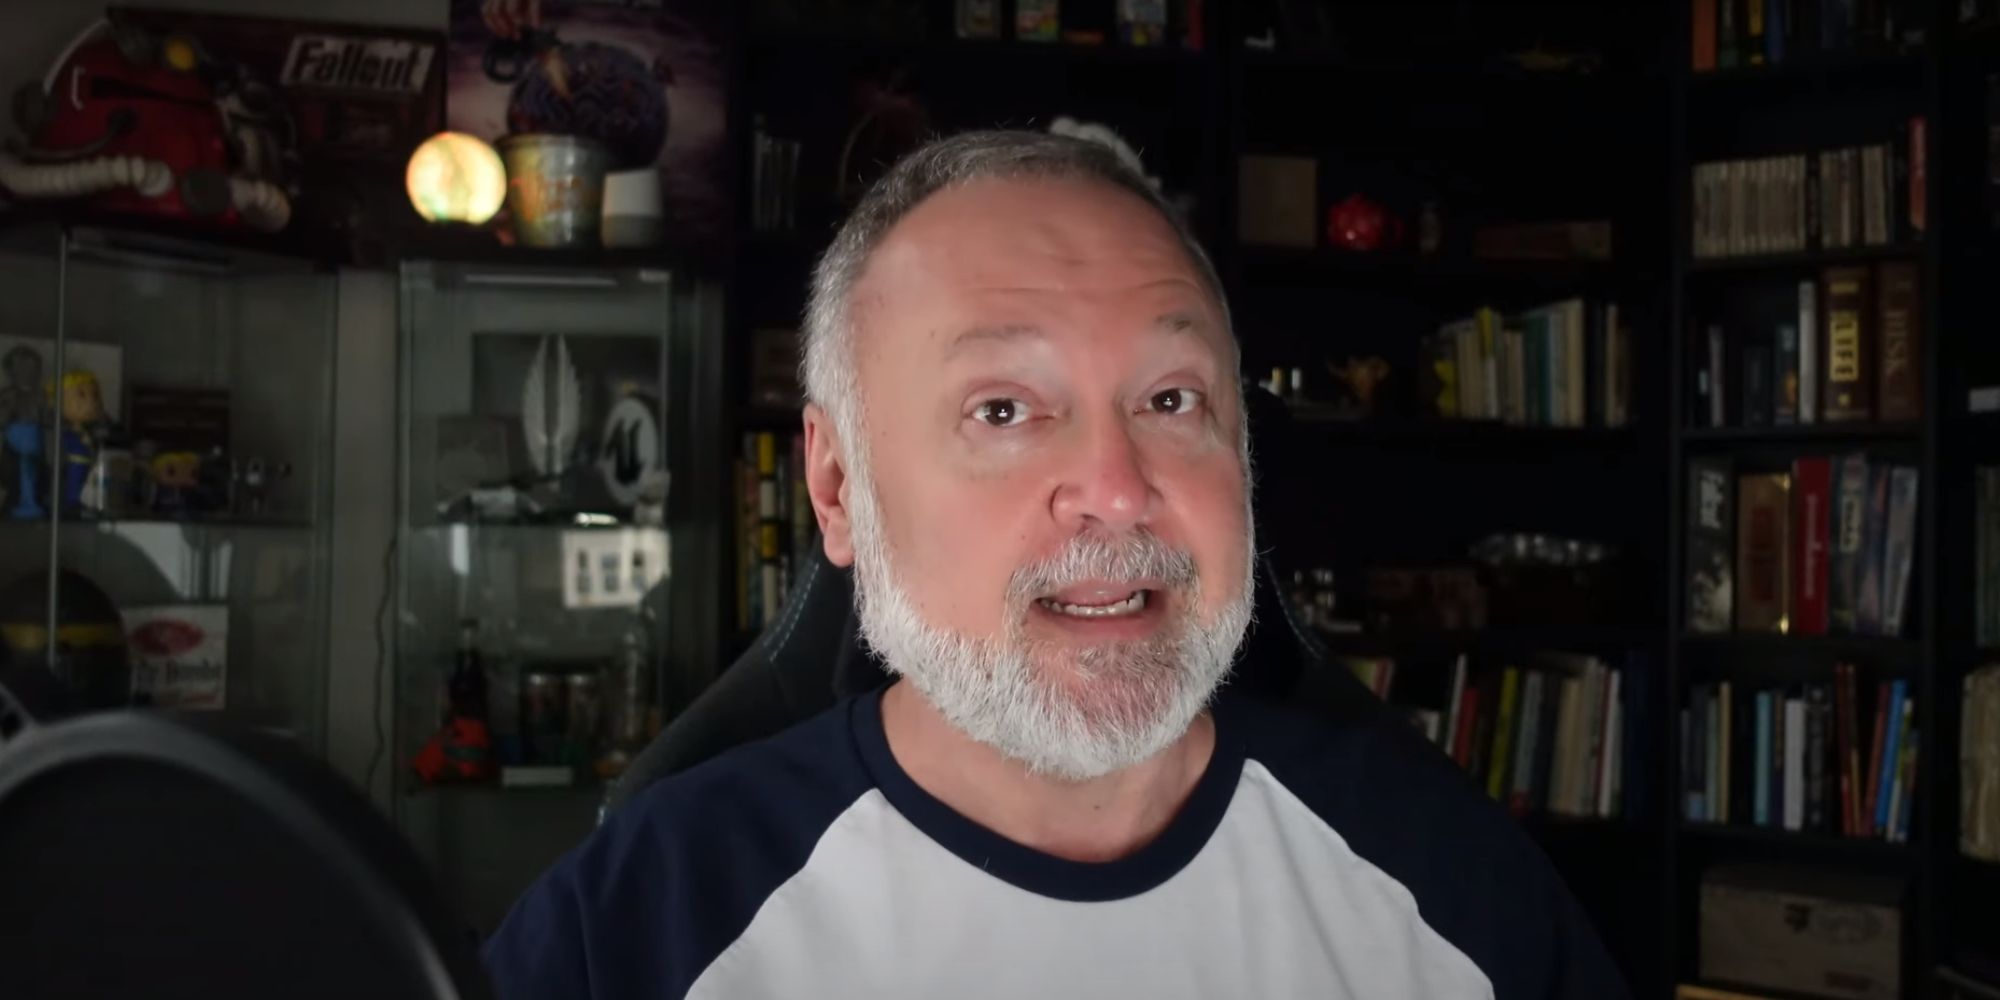 Tim Cain, the creator of the Fallout series, talking to the camera on his YouTube channel. There is merch in the background, including original Fallout merch